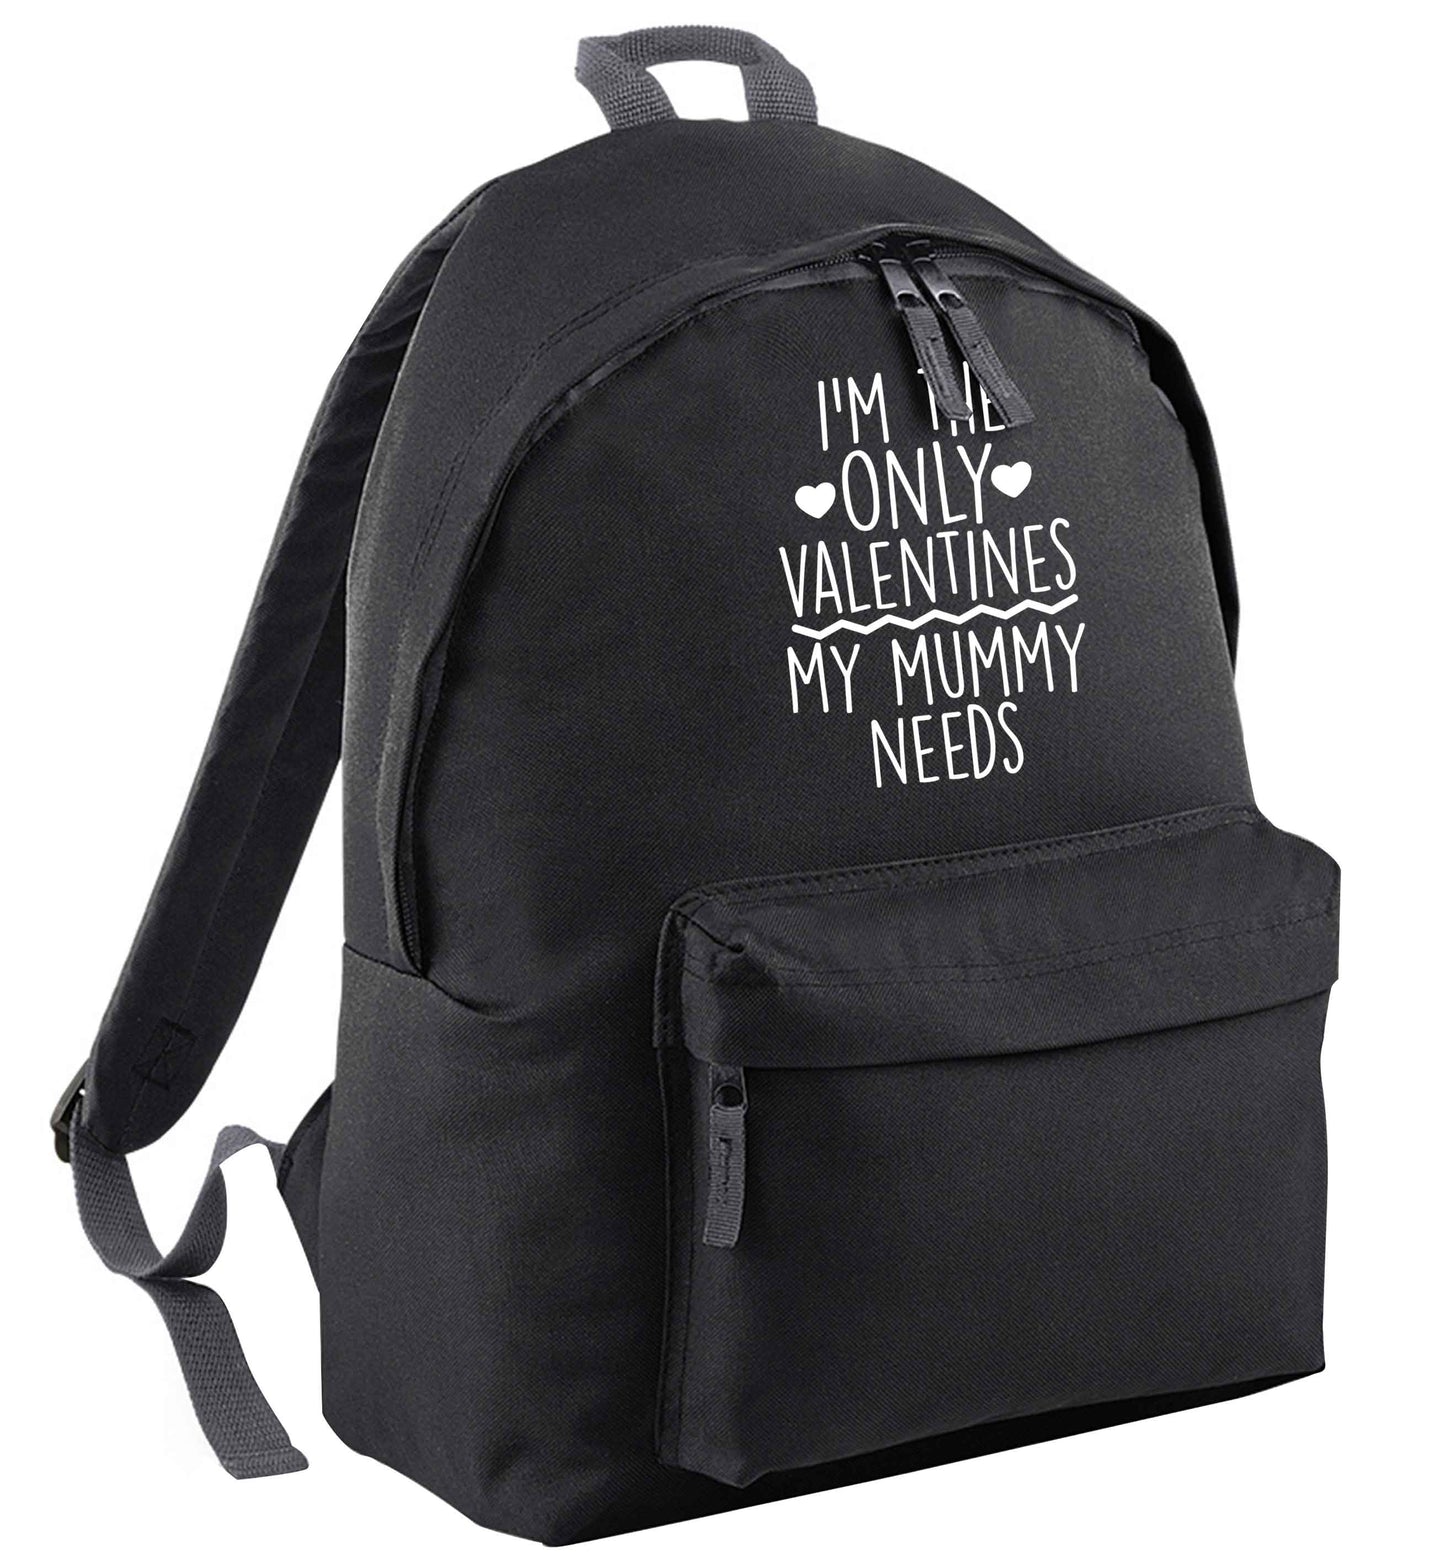 I'm the only valentines my mummy needs | Adults backpack